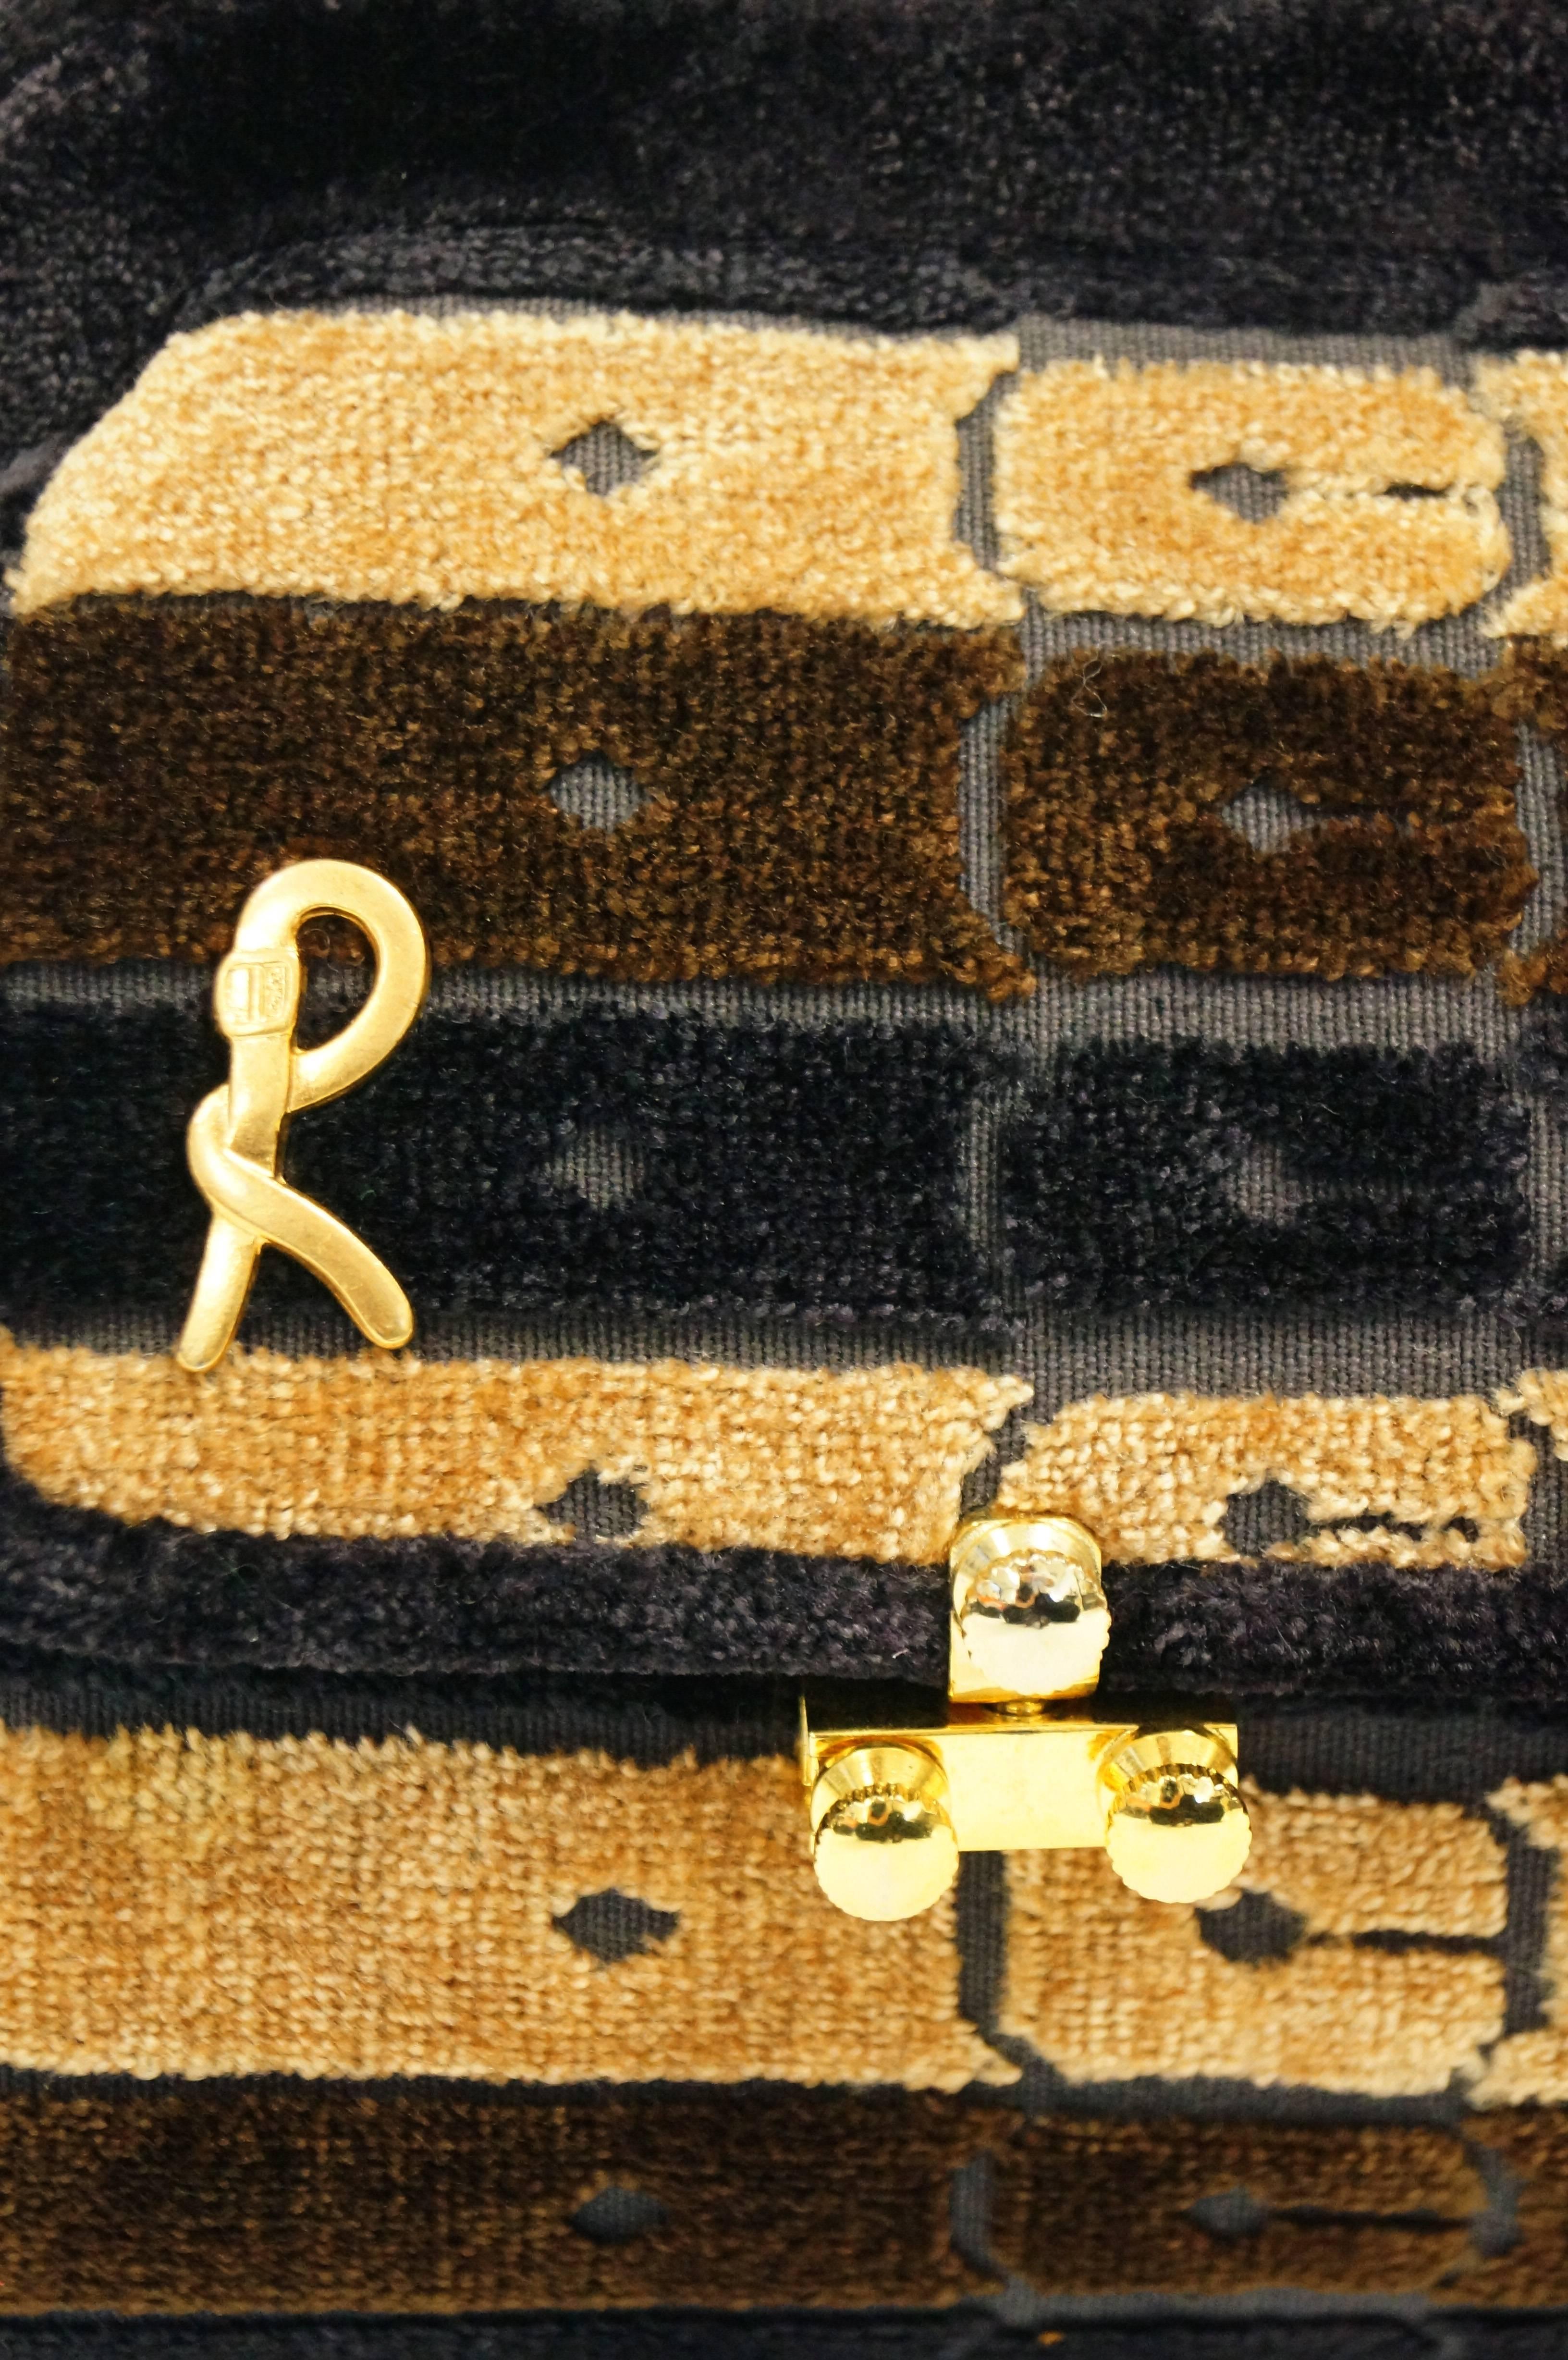 
This vintage purse by Roberta di Camerino is a wonderful, luxurious interpretation of the classic austere doctor bag! The bag is composed of plush velvet cut in a distinct belt and buckle pattern of gold, brown, and black stripes. The famous